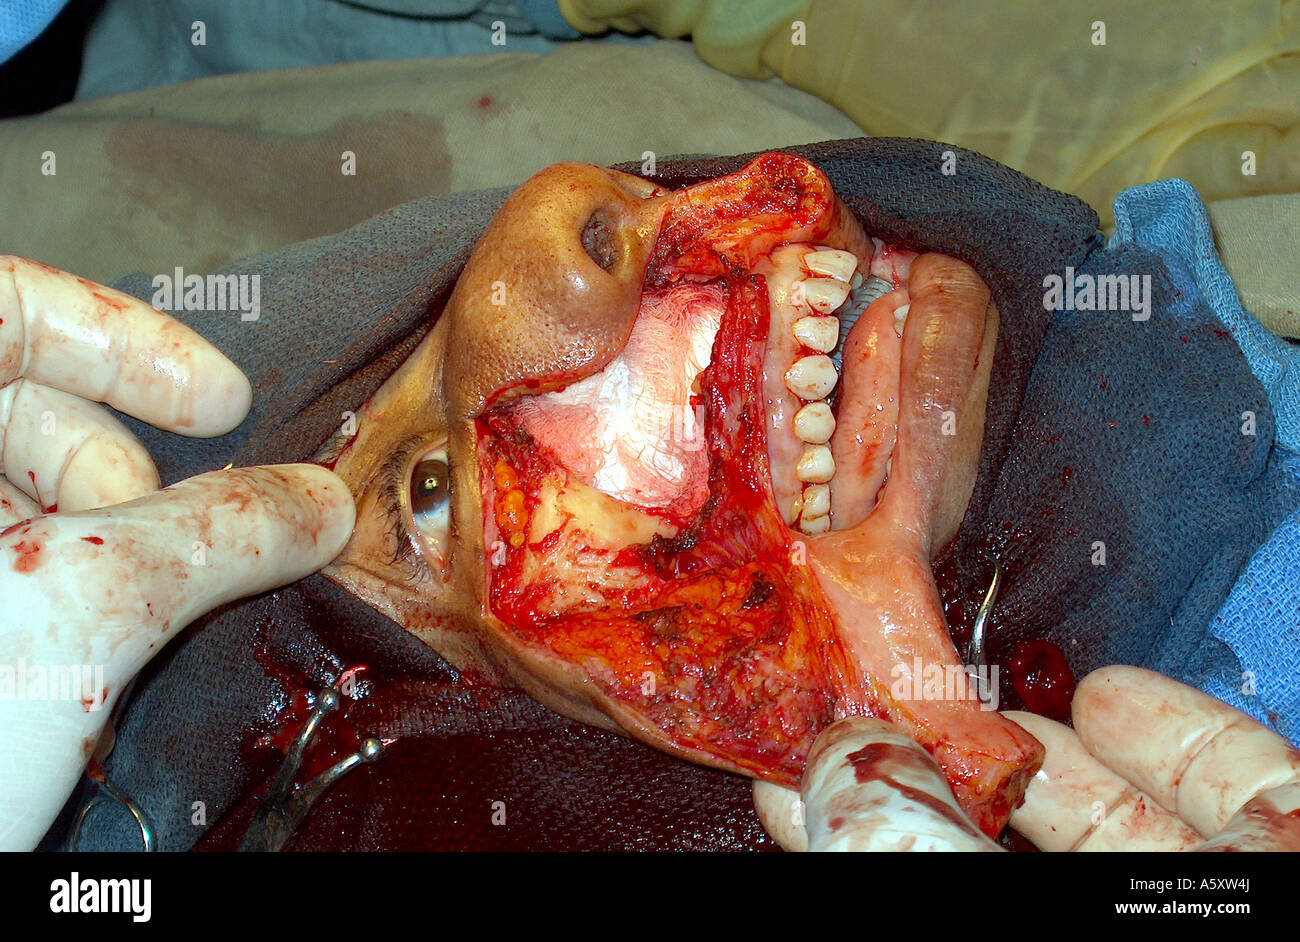 surgery for the removal of a facial tumor in a Nigerian patient Stock Photo